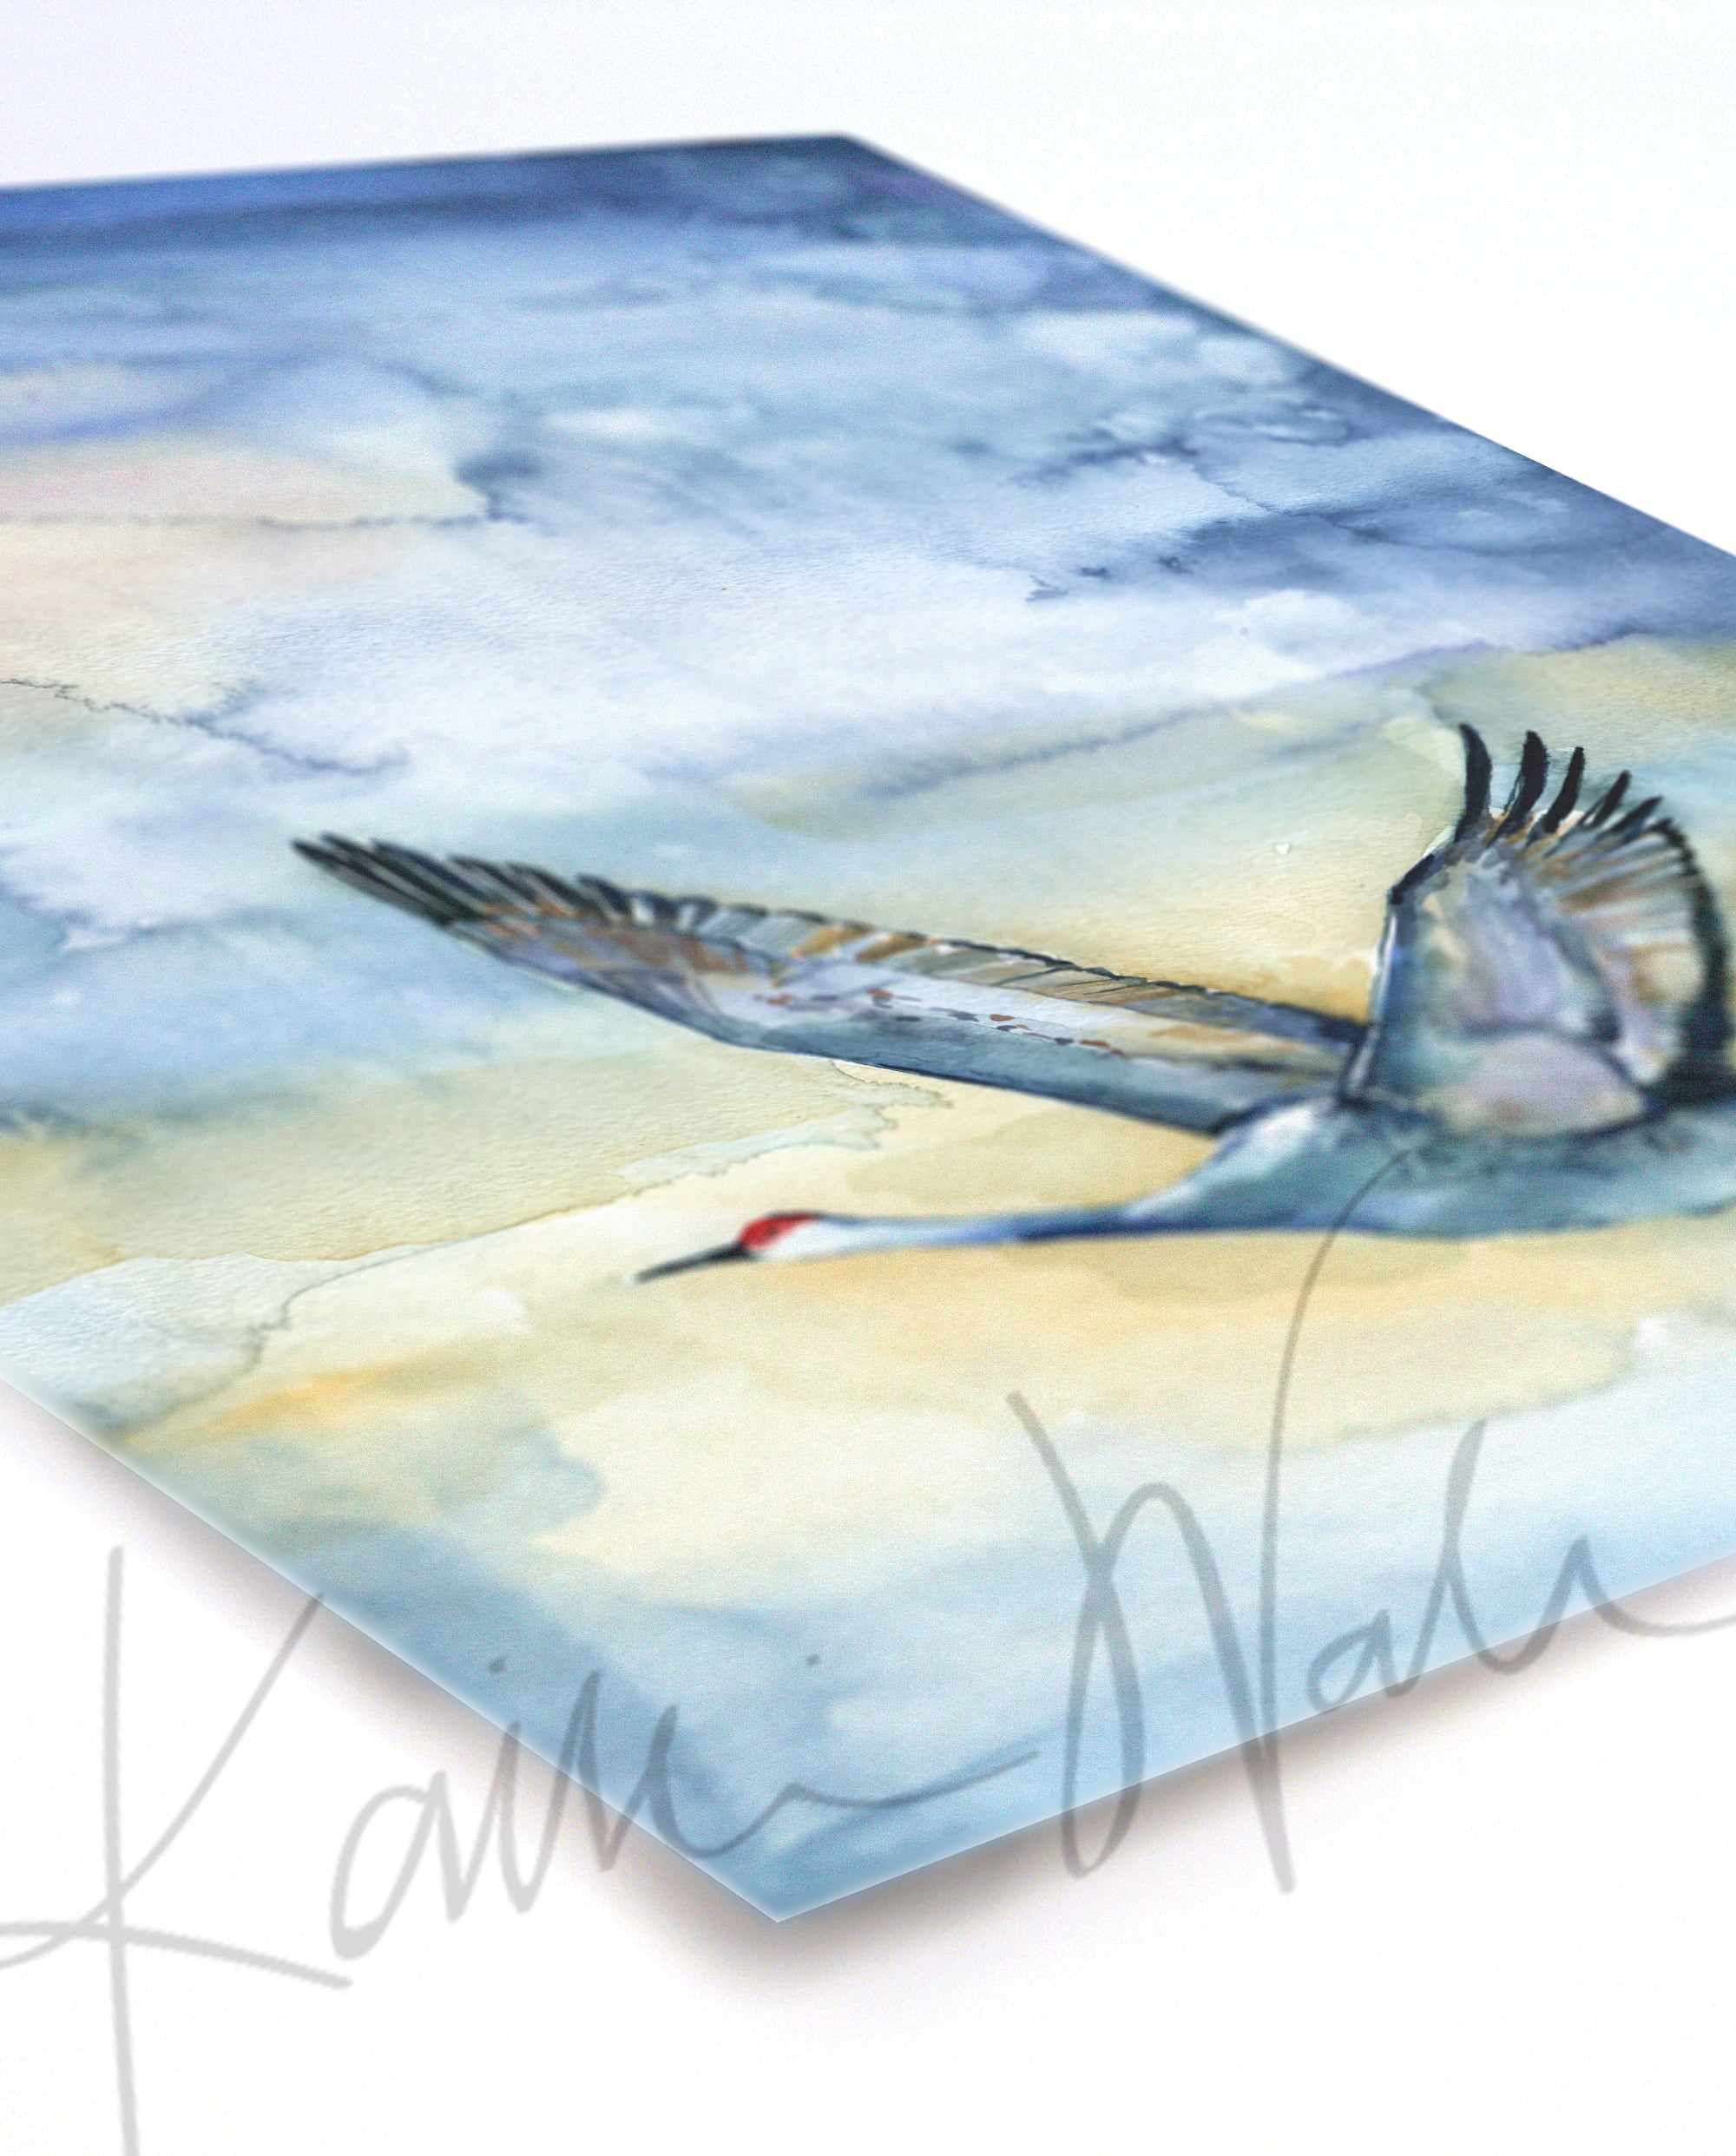 Unframed watercolor painting of a flying crane, at an angle.